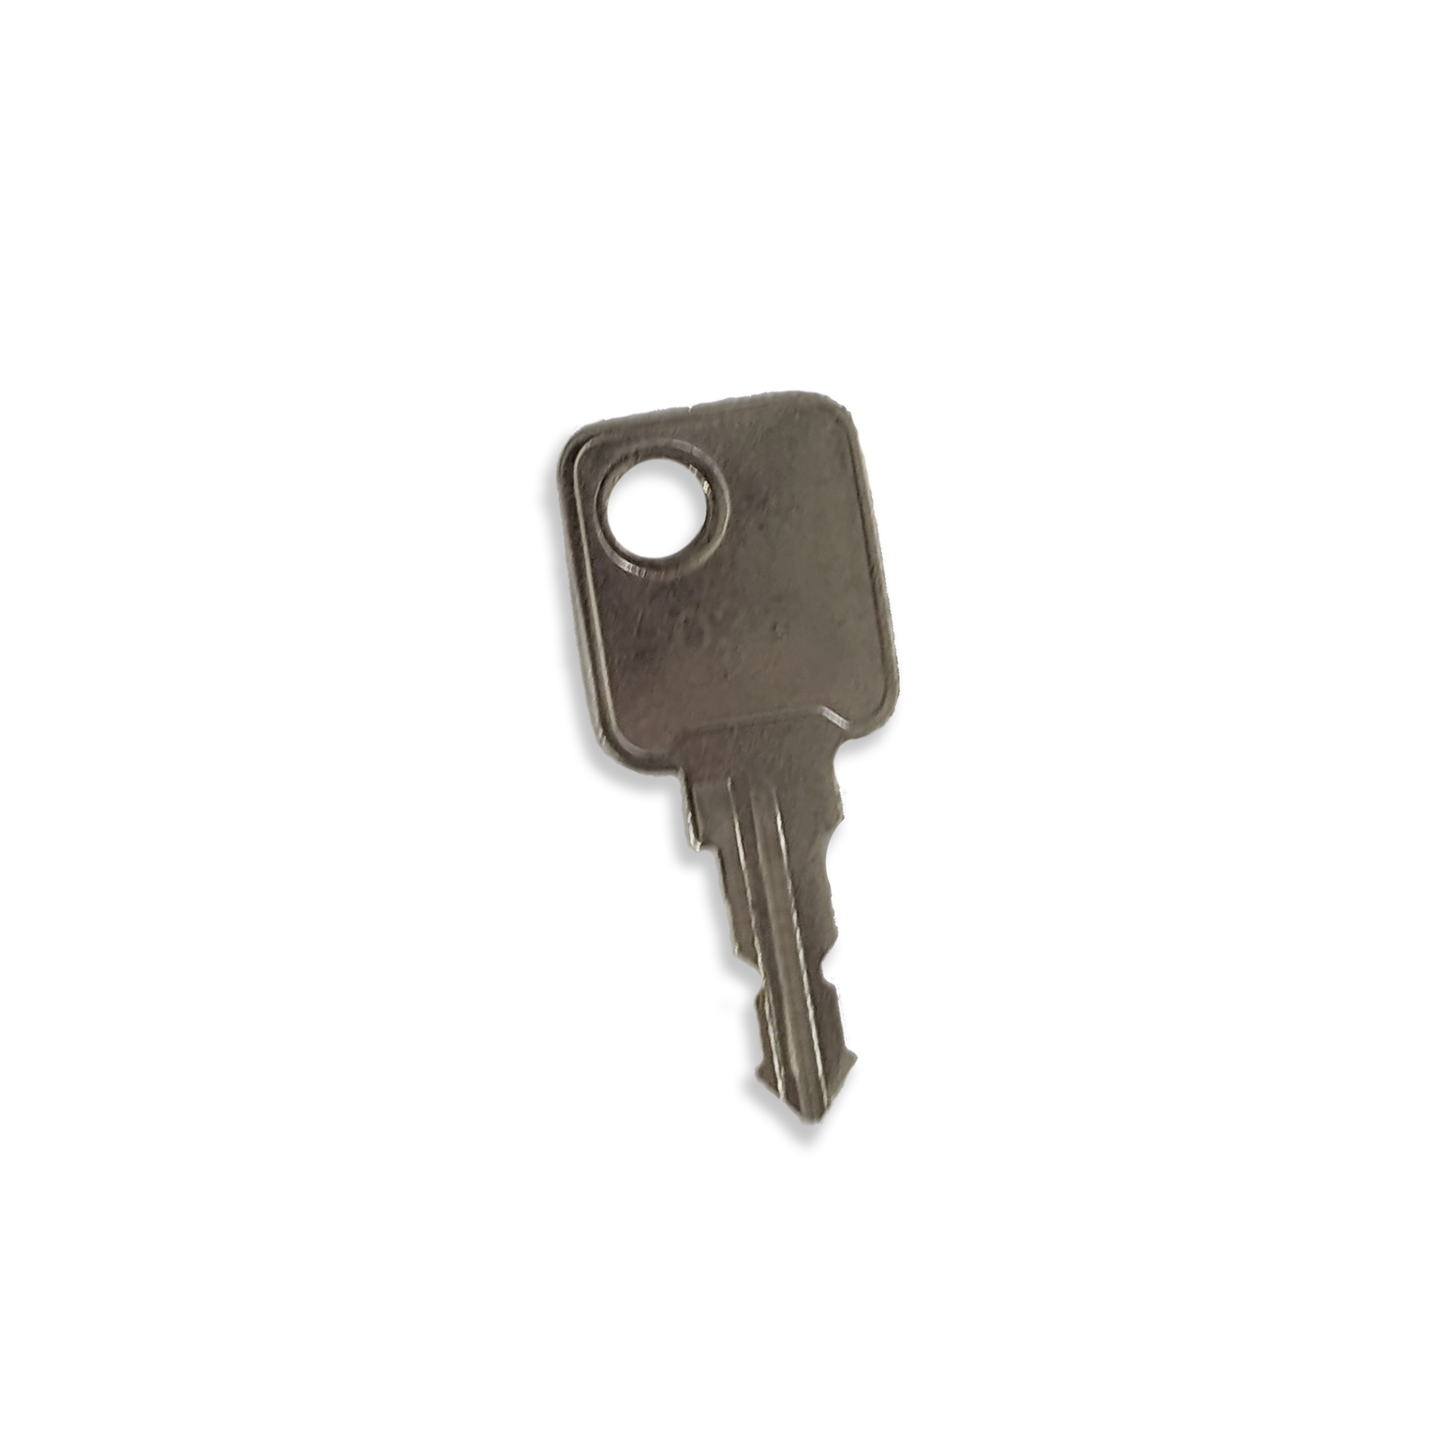 Replacement Key for Cathedral Products Cash Boxes Numbers 201 - 202